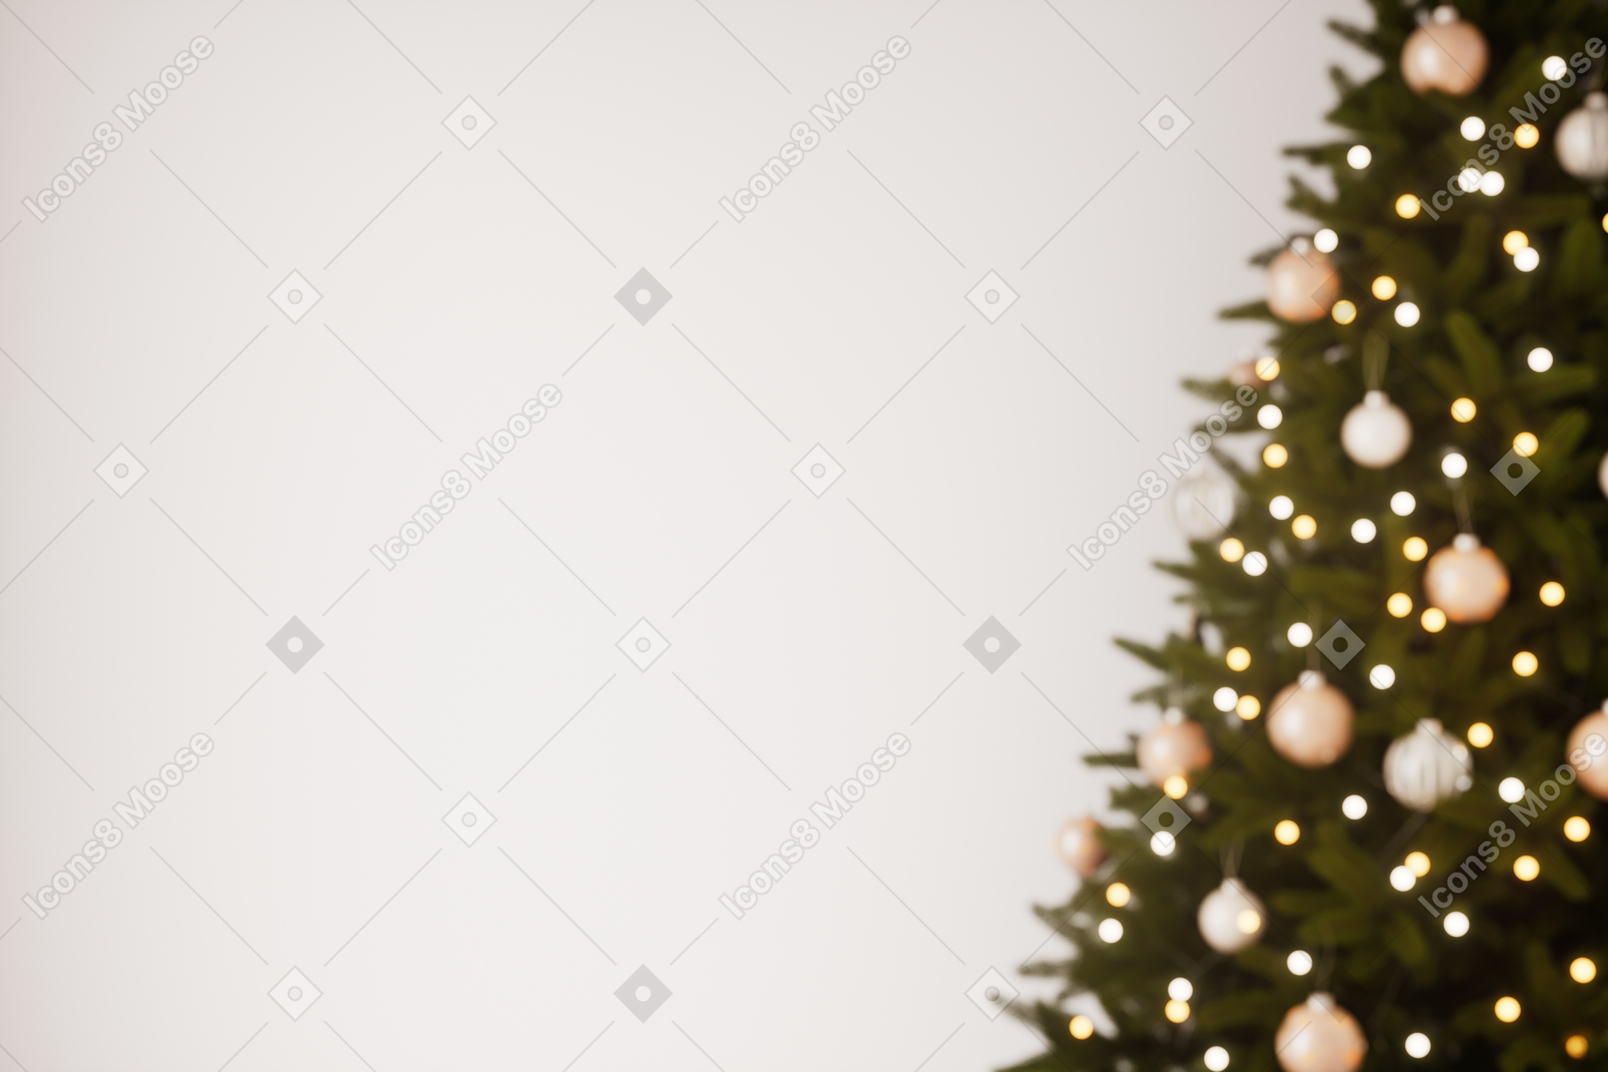 Decorated christmas tree out of focus